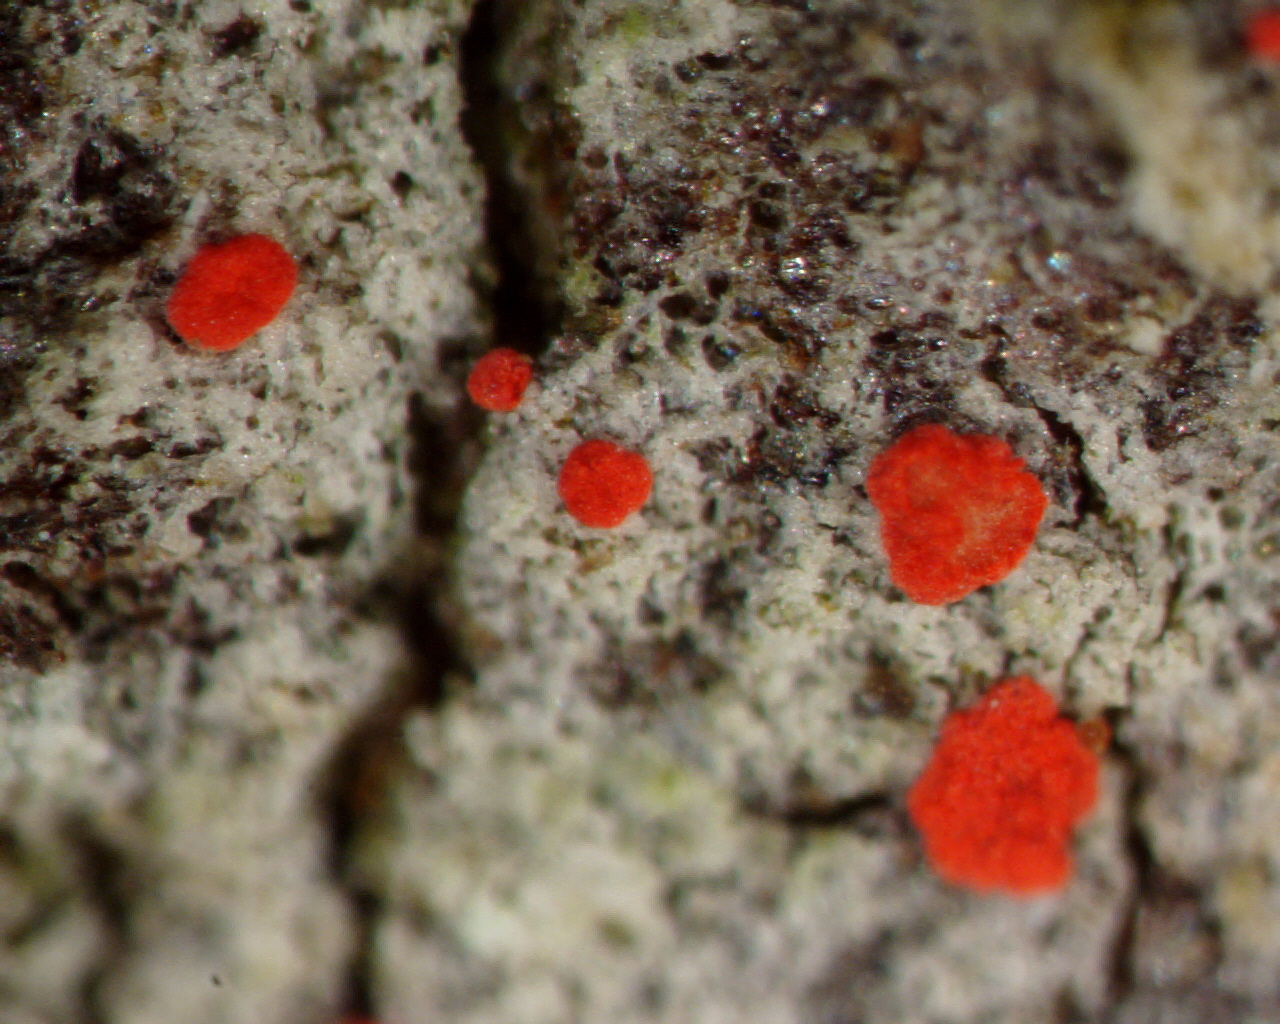 Lichens: An Exploration of a Hidden World in Peril